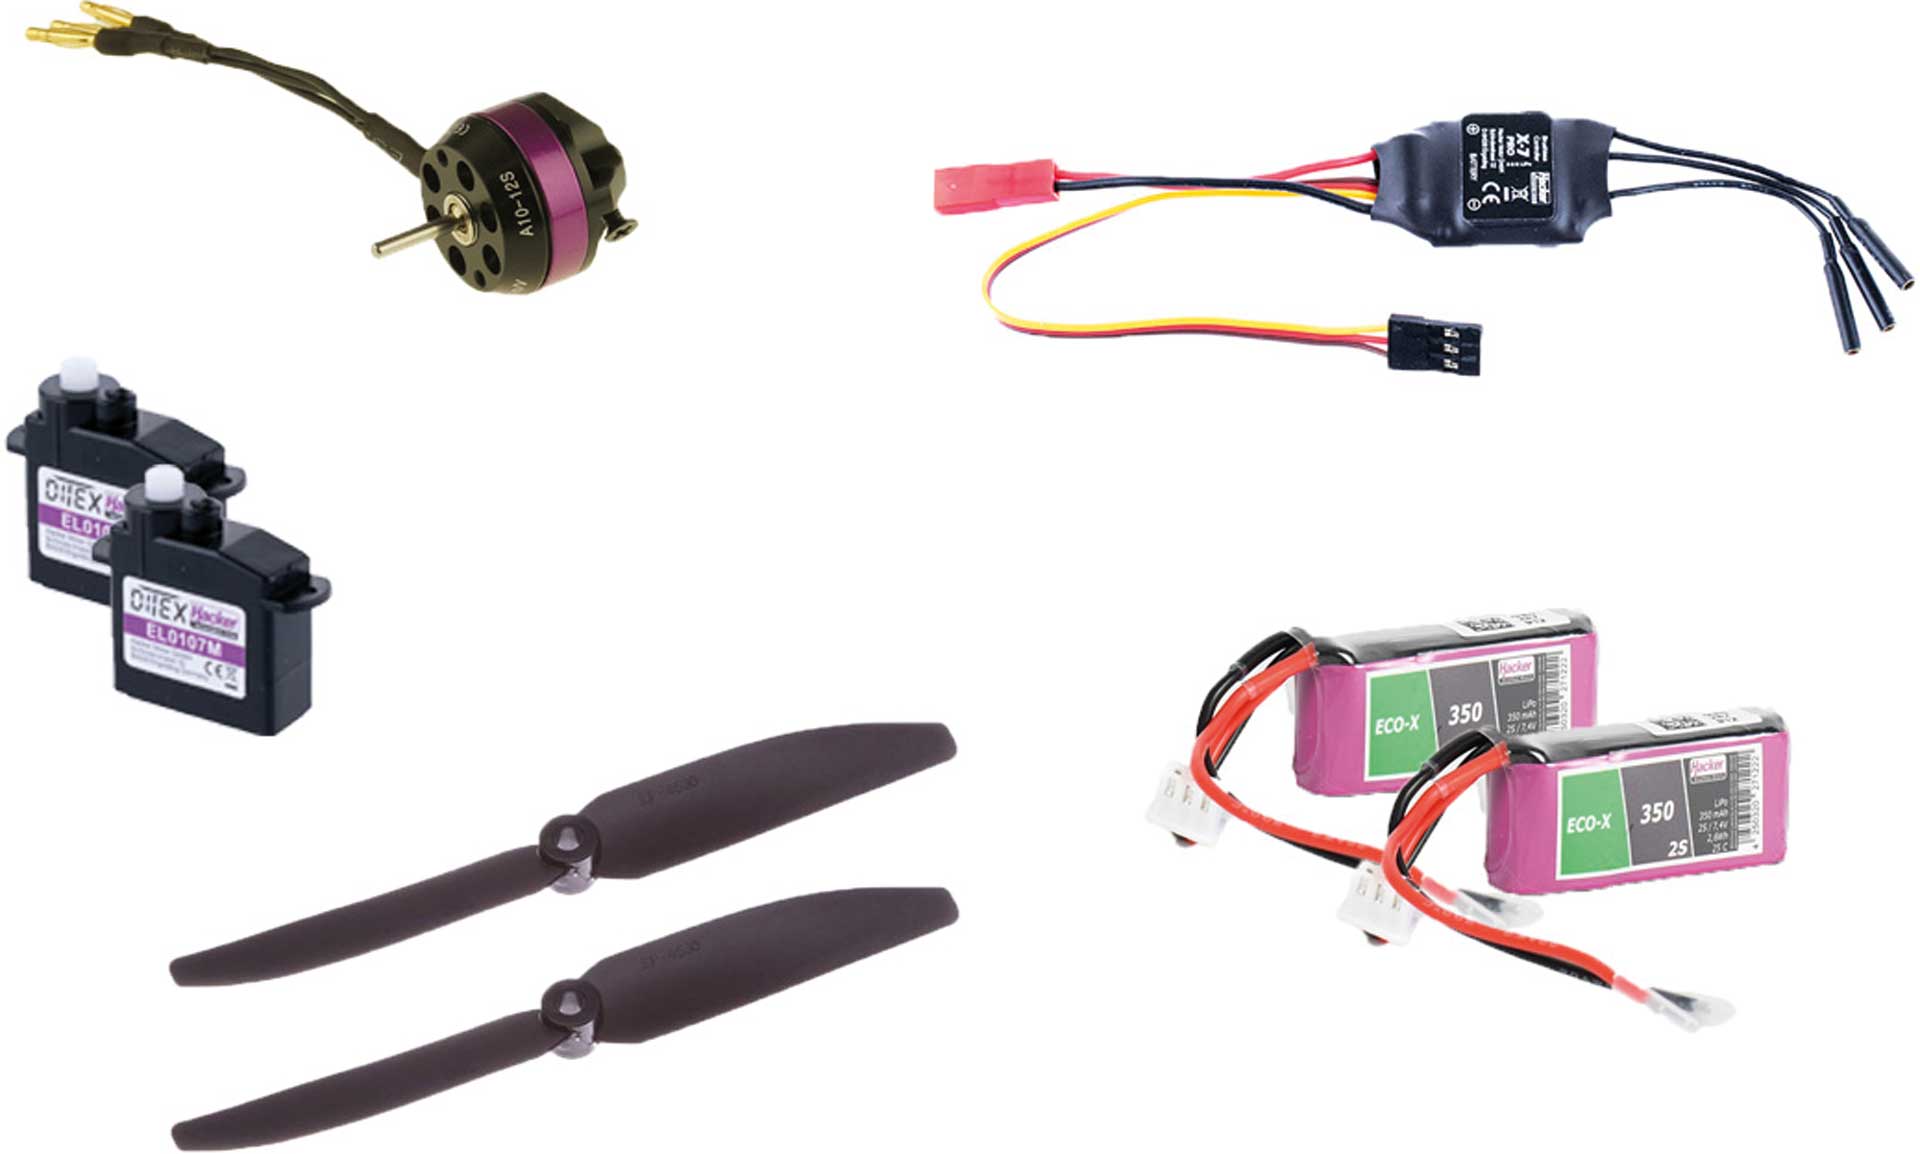 HACKER SkyFighter² electronics set with drive, servos and Lipo battery